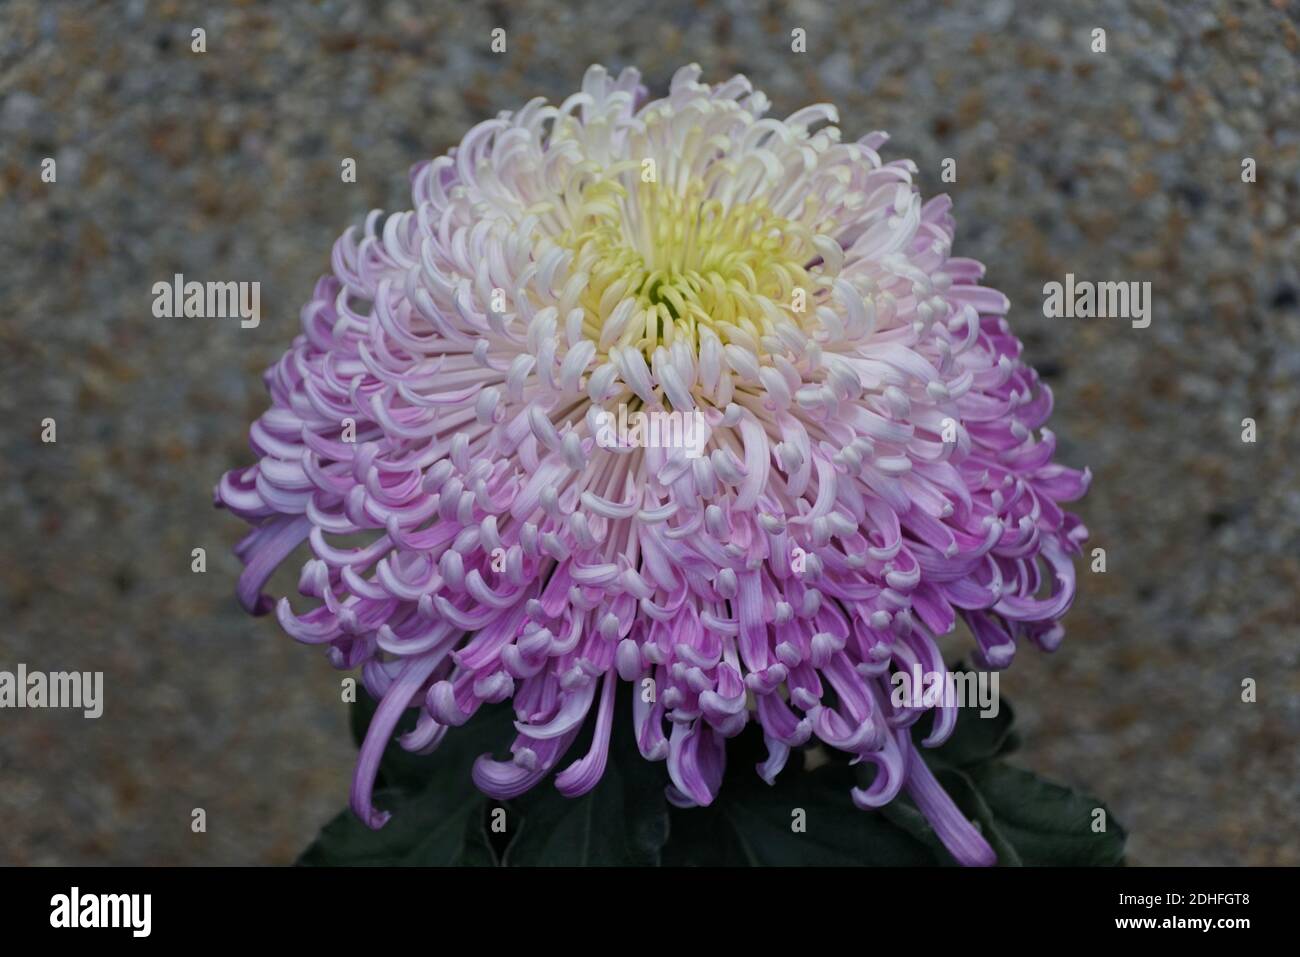 Close up of the light purple and yellow color of spider mum 'Flair' flower Stock Photo